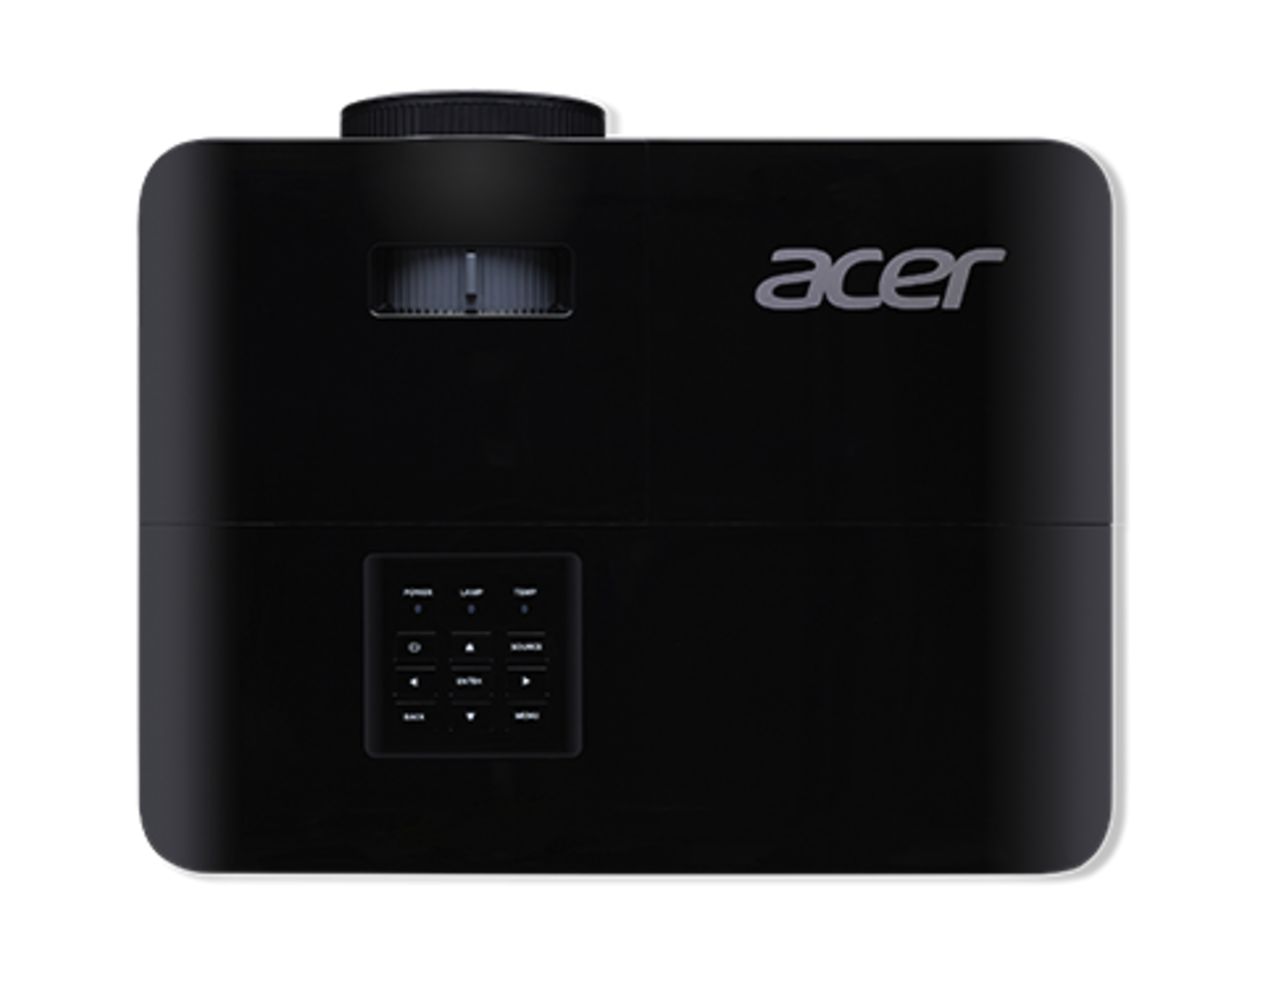 Proiector ACER X1528i, FHD 1920*1080, up to WUXGA 1920* 1200, 4300 lumeni, 16:9/ 4:3, 10.000:1, zoom 1.1x, lampa 5.000 ore/ 12.000 ore ExtremEco, 27- 36dB, D-sub, 2* HDMI, PC audio, composite video/ RCA, USB (Wireless dongle, Hidden Type A2.0), DC Out (5V/1A, USB Type A), RS232, greutate 2.9 kg_4